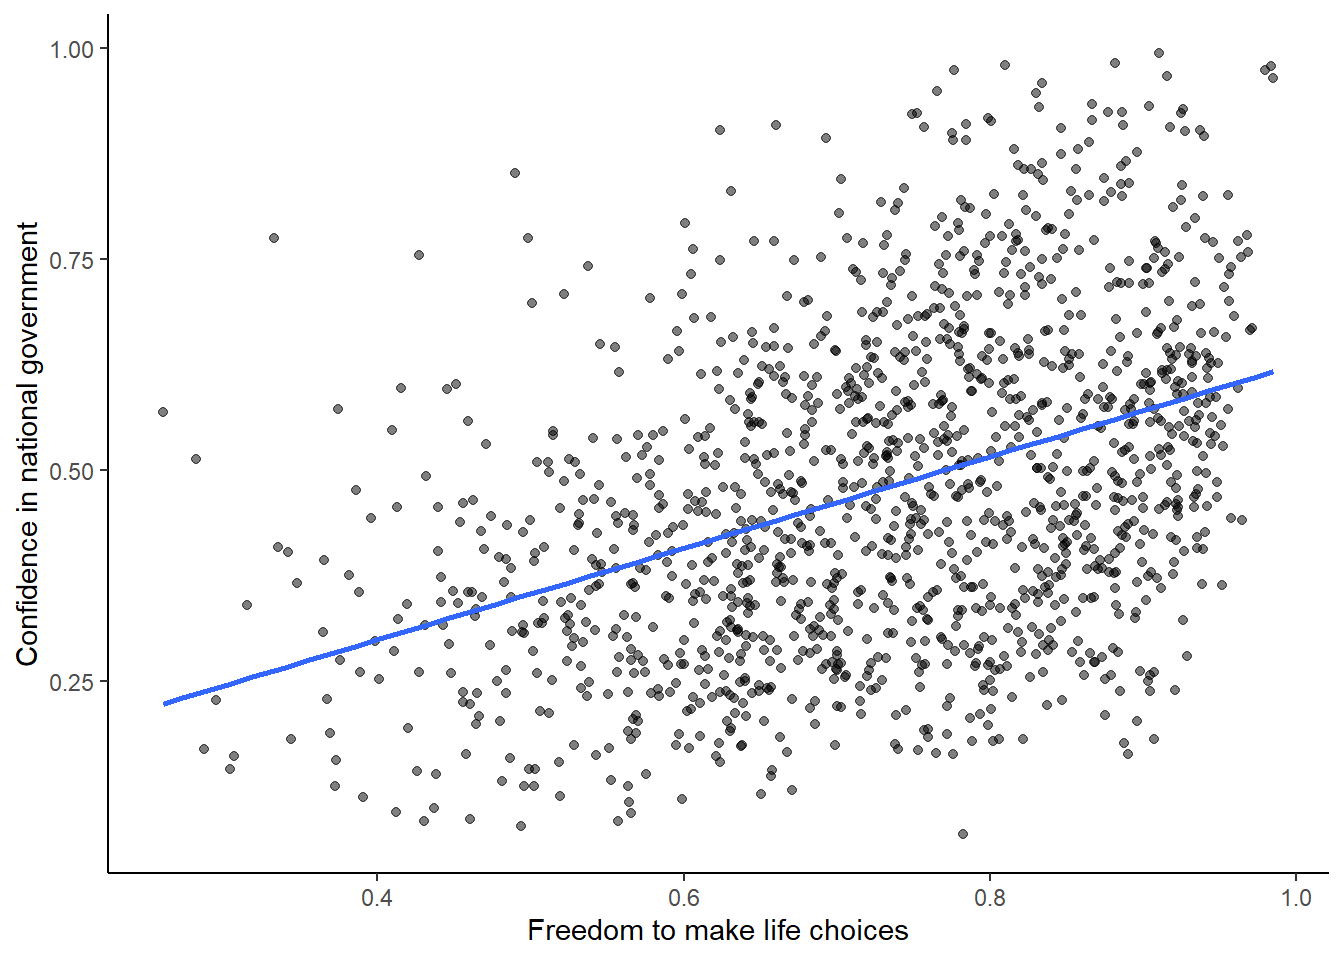 Relationship between freedom to make life choices and confidence in national government. Data from the world happiness report for 2018